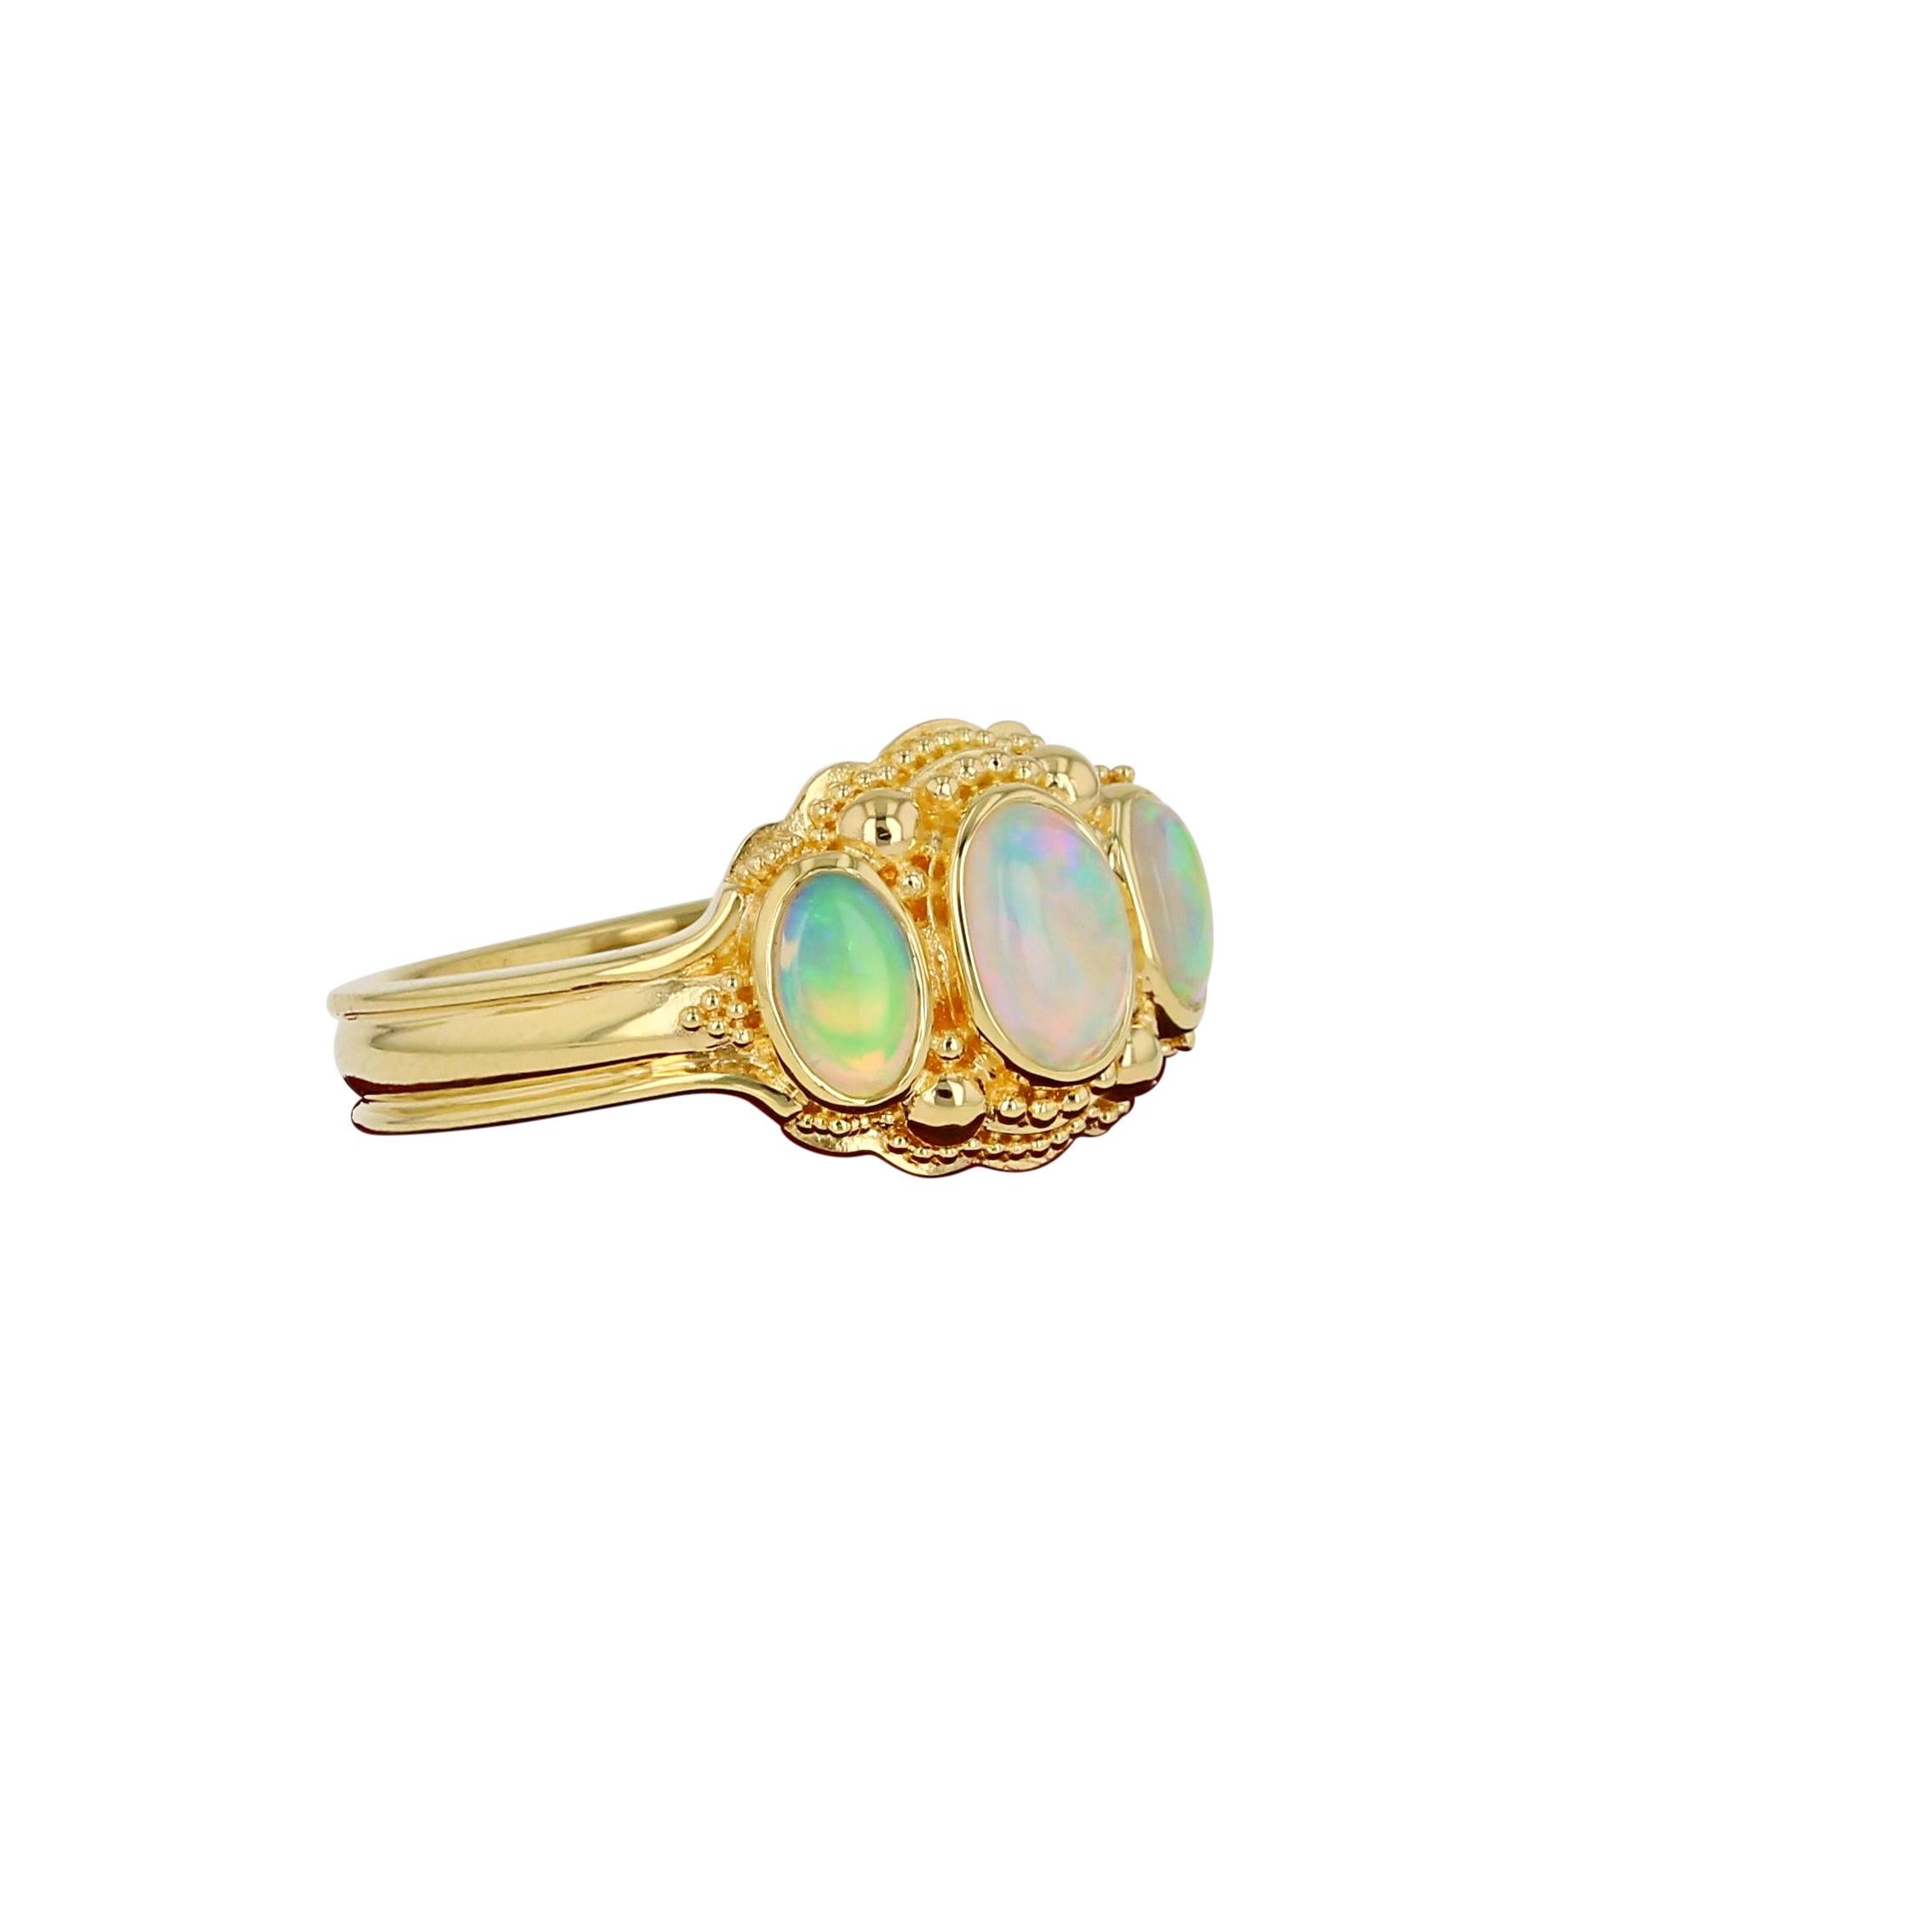 Oval Cut Kent Raible Opal Three-Stone Ring with Fine 18k Gold Granulation